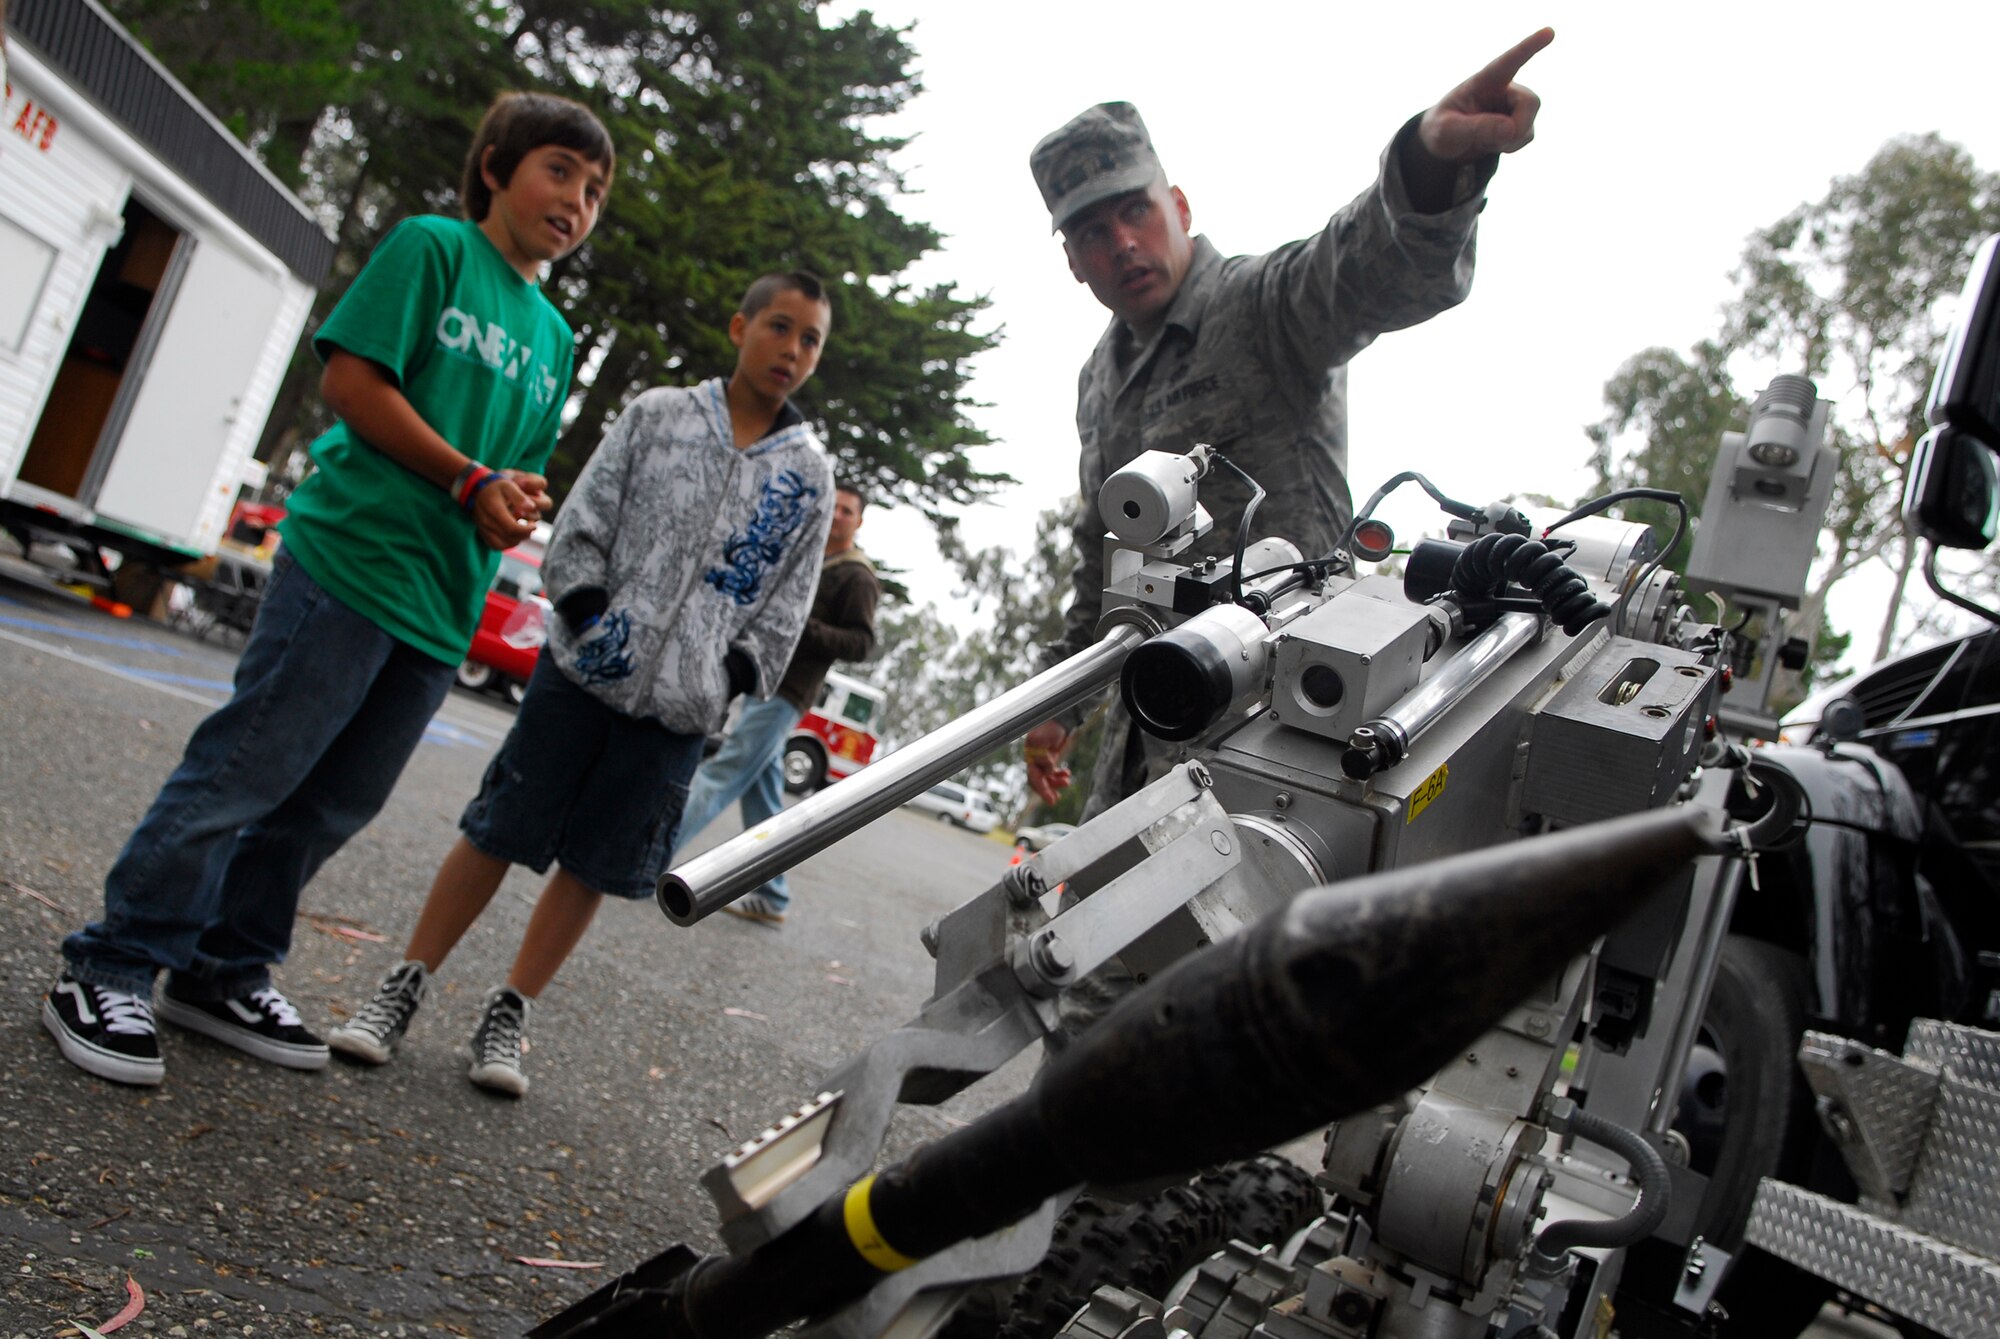 VANDENBERG AIR FORCE BASE, Calif. -- Master Sgt. Edward Lockhart, the 30th Civil Engineer Squadron explosive ordnance disposal flight chief, shows the F-6 robot in action during the Team Vandenberg Kids' Carnival at Cocheo Park here Saturday, April 24, 2010.  The carnival showcased a variety of Vandenberg unit's tools of the trade for a hands-on experience.  (U.S. Air Force photo/Senior Airman Andrew Satran) 

 

 
 

 